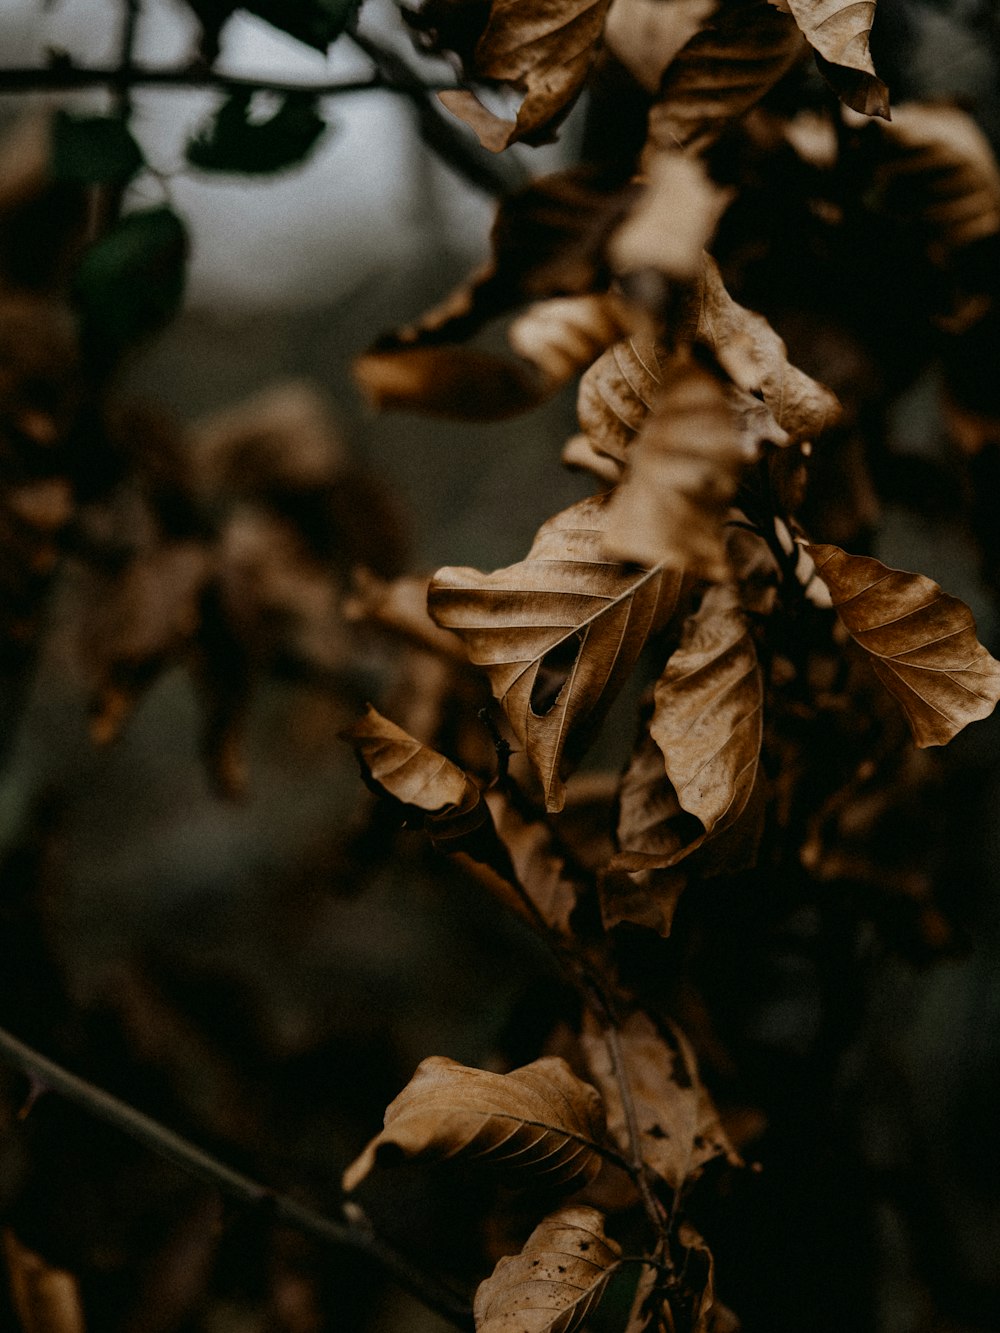 brown dried leaves in close up photography